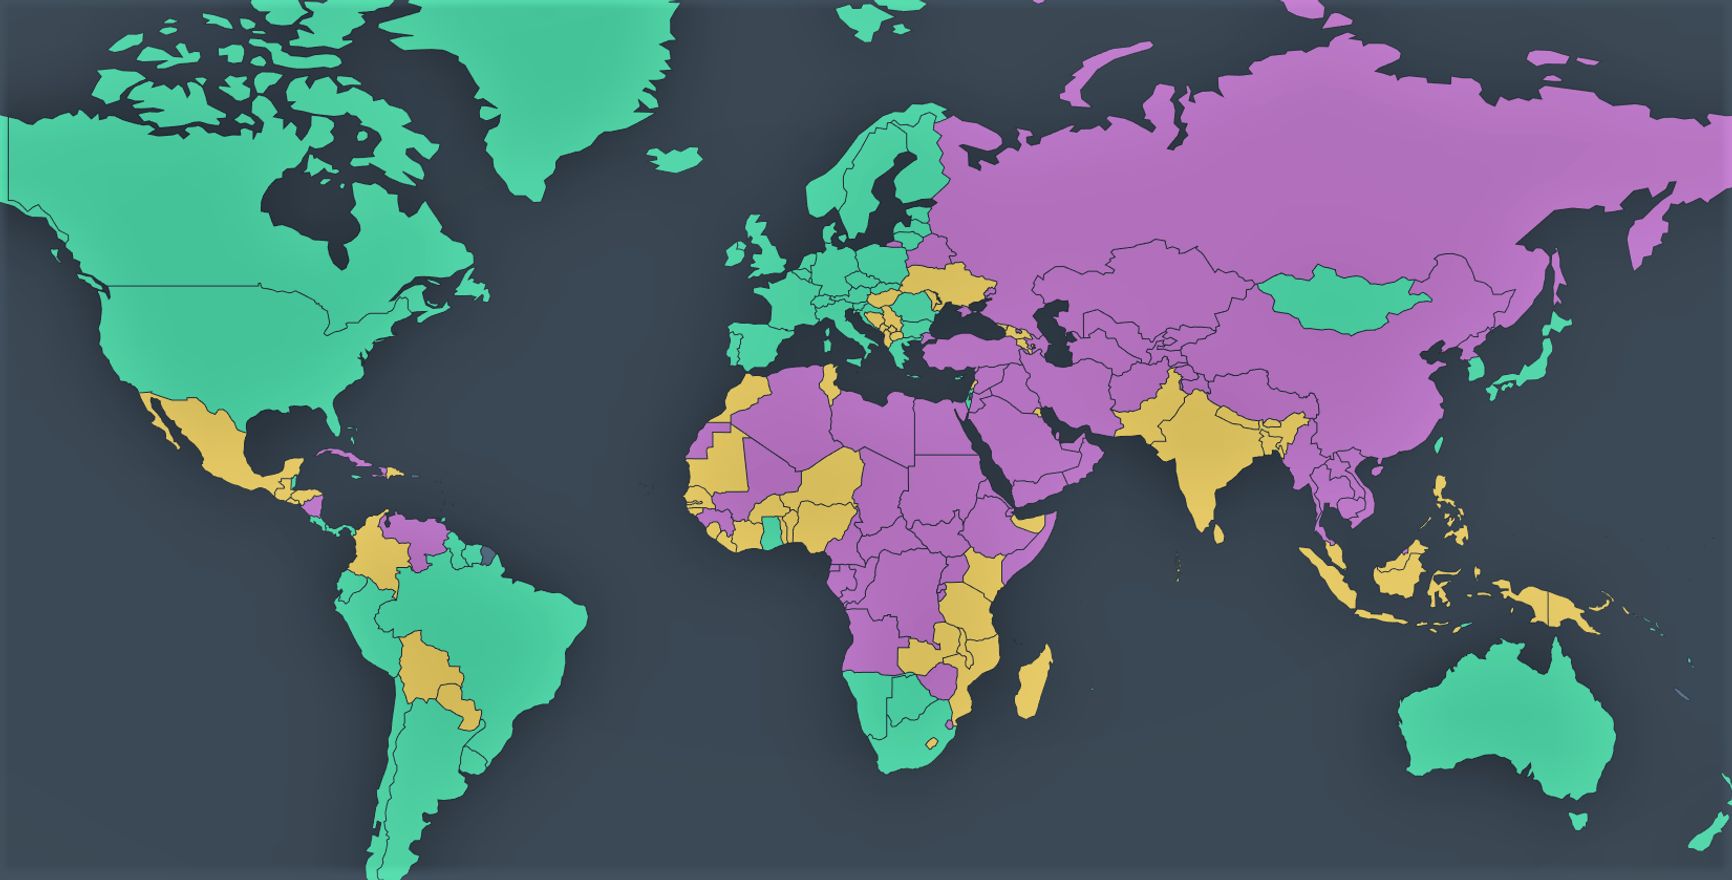 The global freedom map by Freedom House. Green regimes are considered free, yellow regimes are partly free, and purple regimes lack freedoms. Mongolia is surrounded by authoritarian regimes